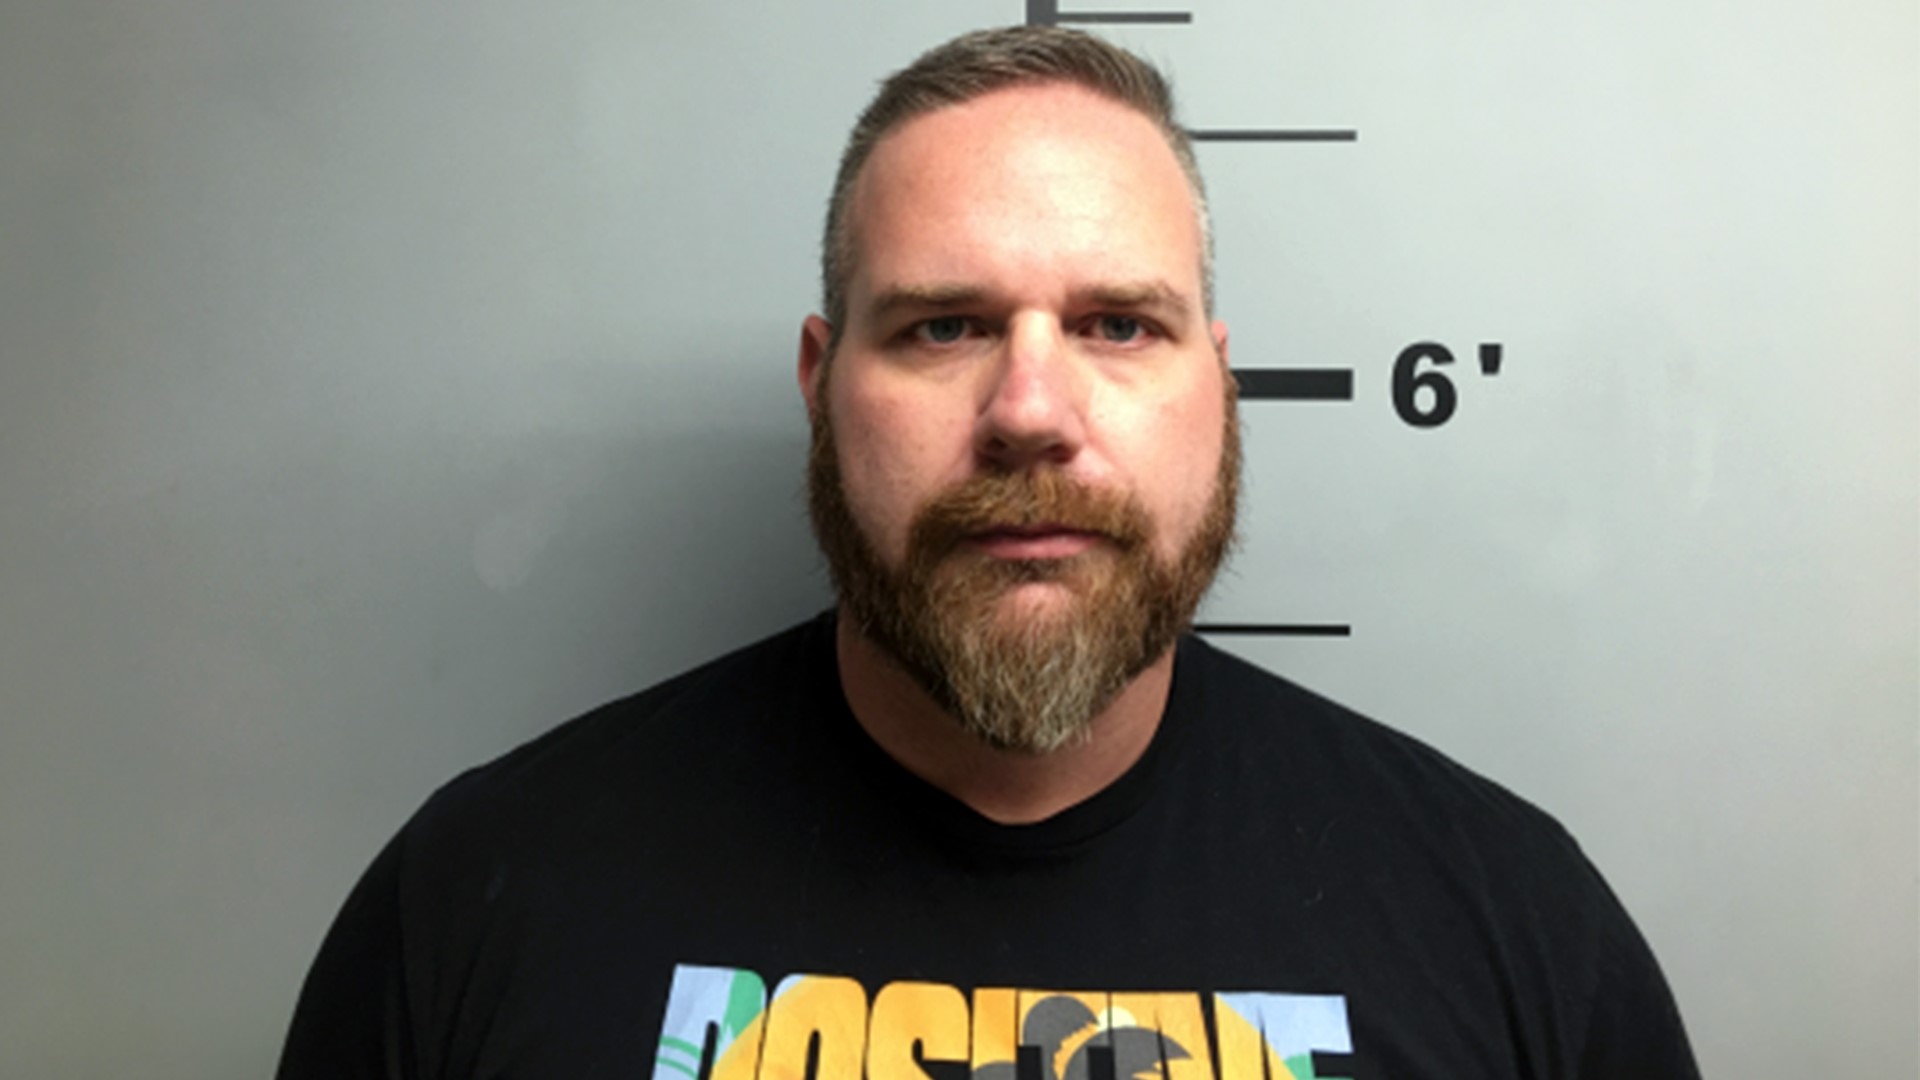 Benton County deputy Matthew Cline has been fired after he was charged with second-degree sexual assault.